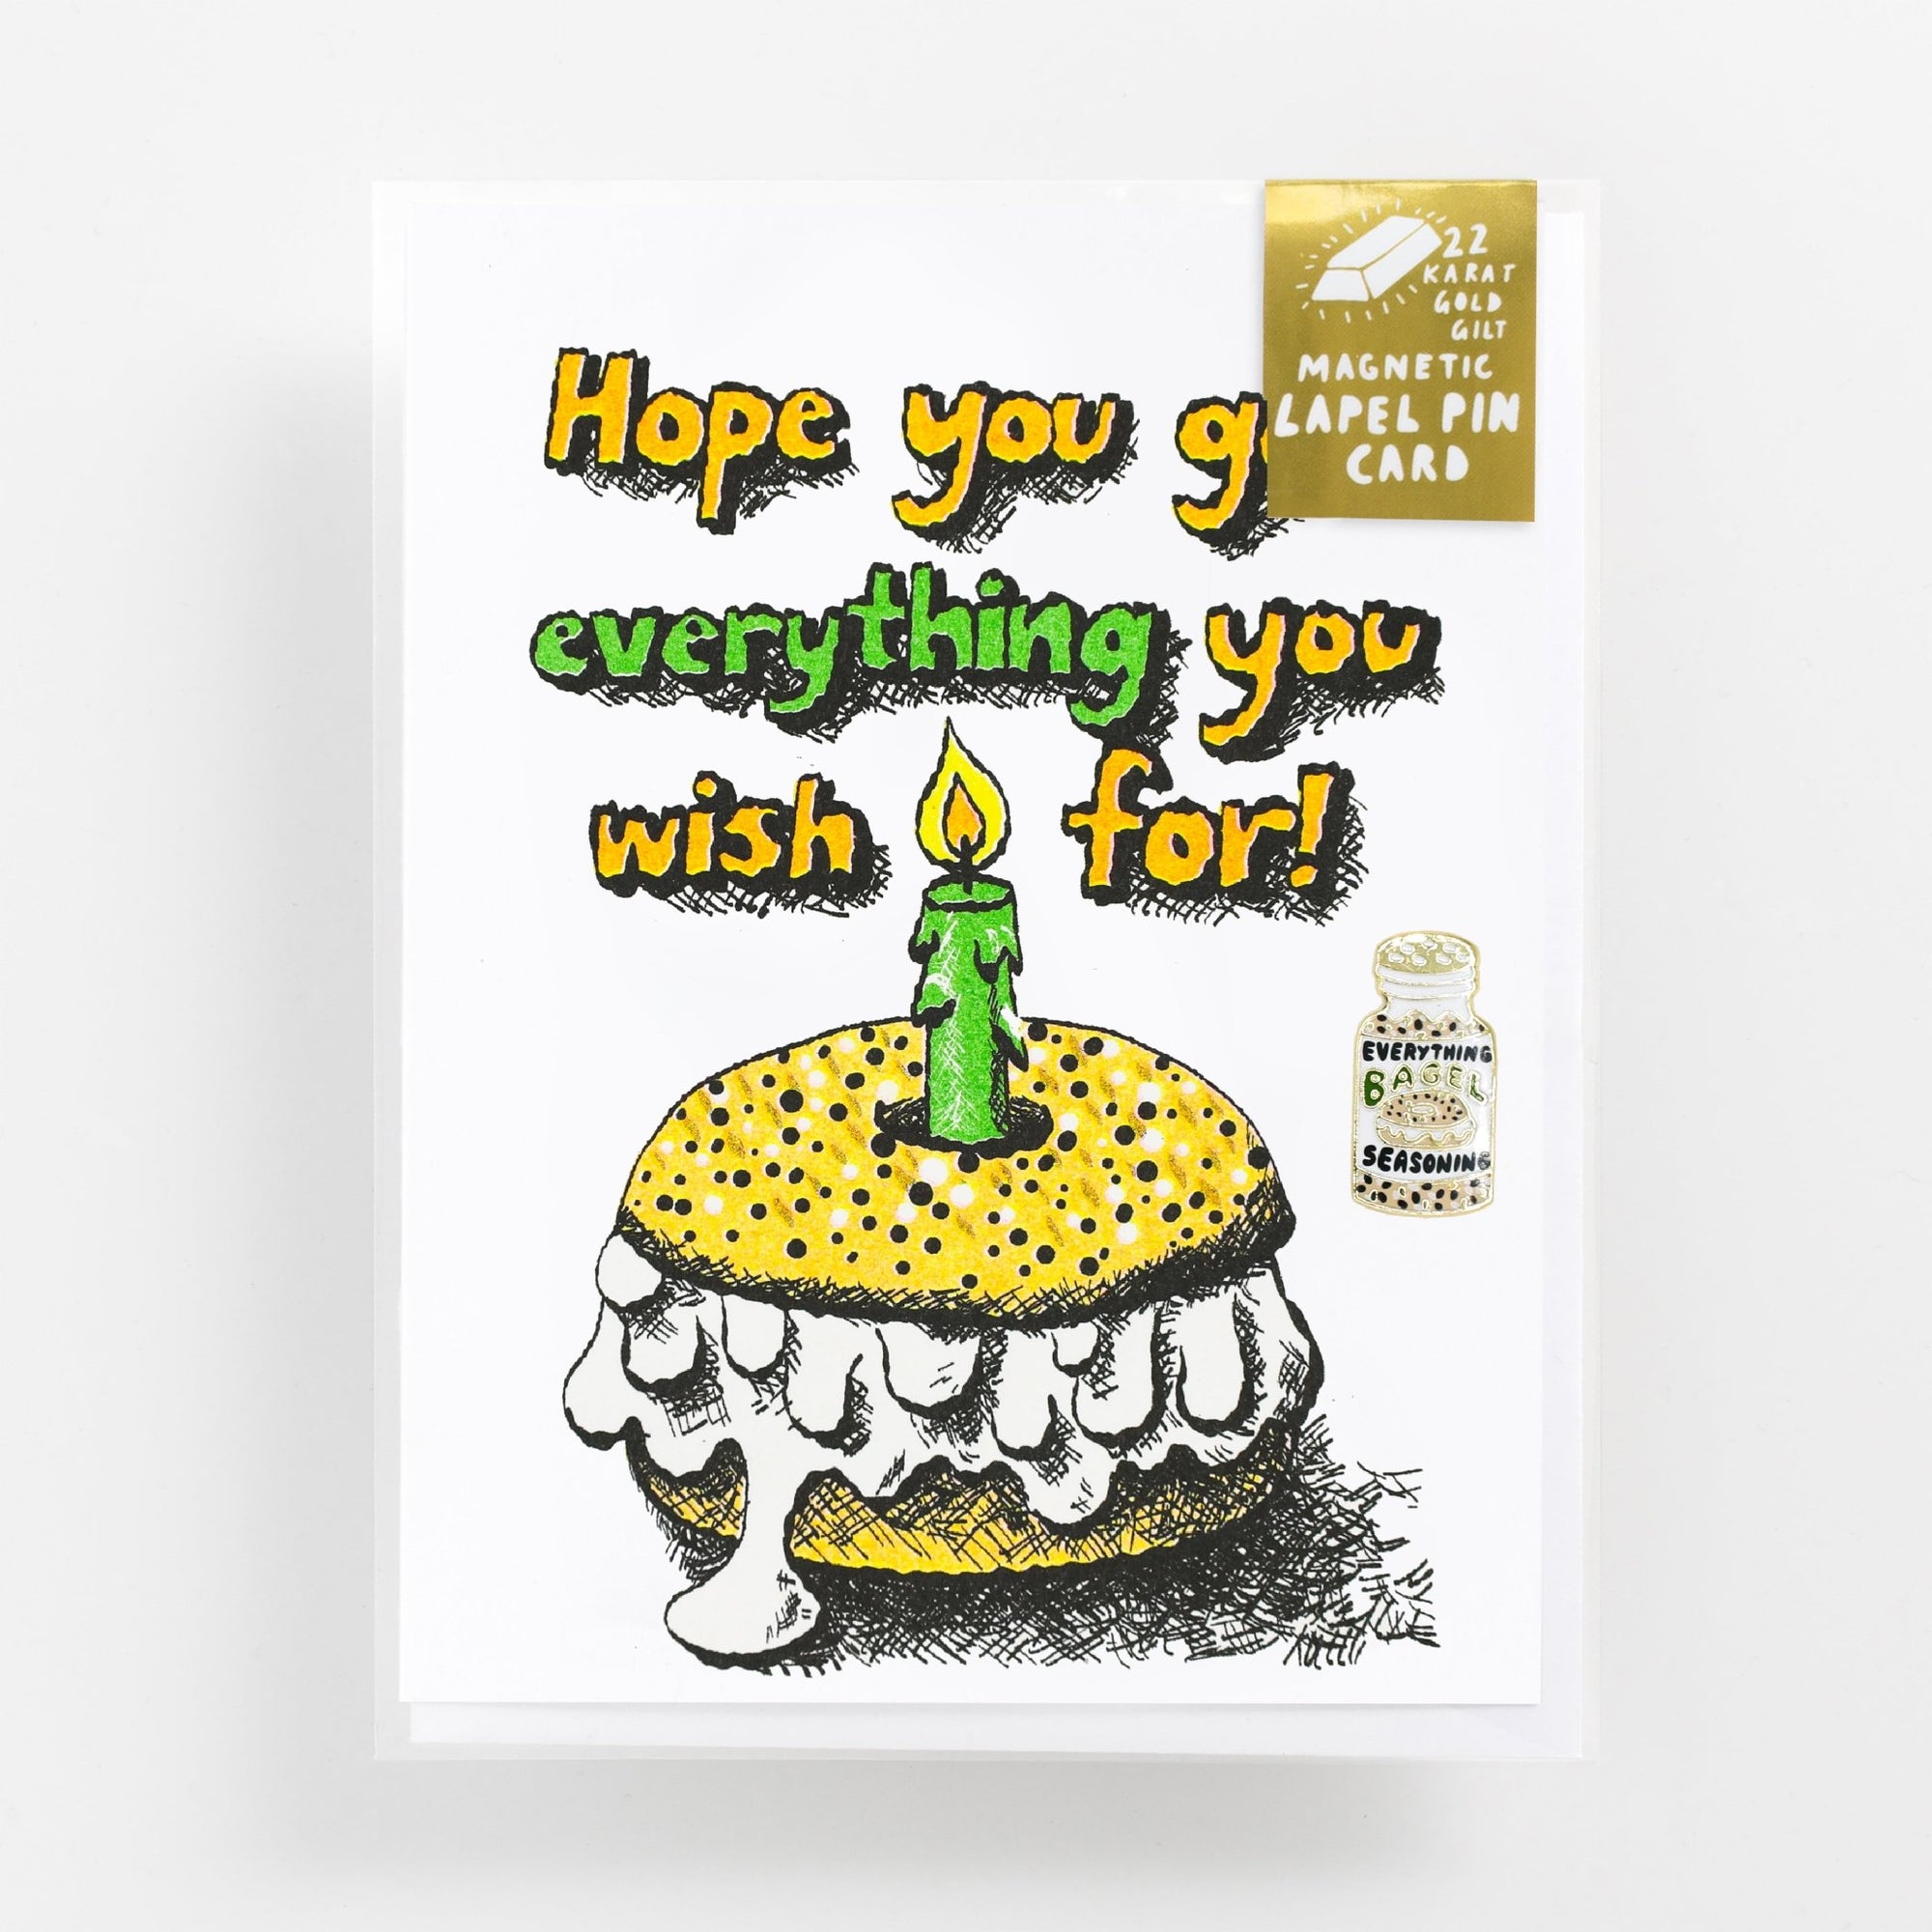 Hope You Get Everything You Wish - Lapel Pin Card - Yellow Owl Workshop